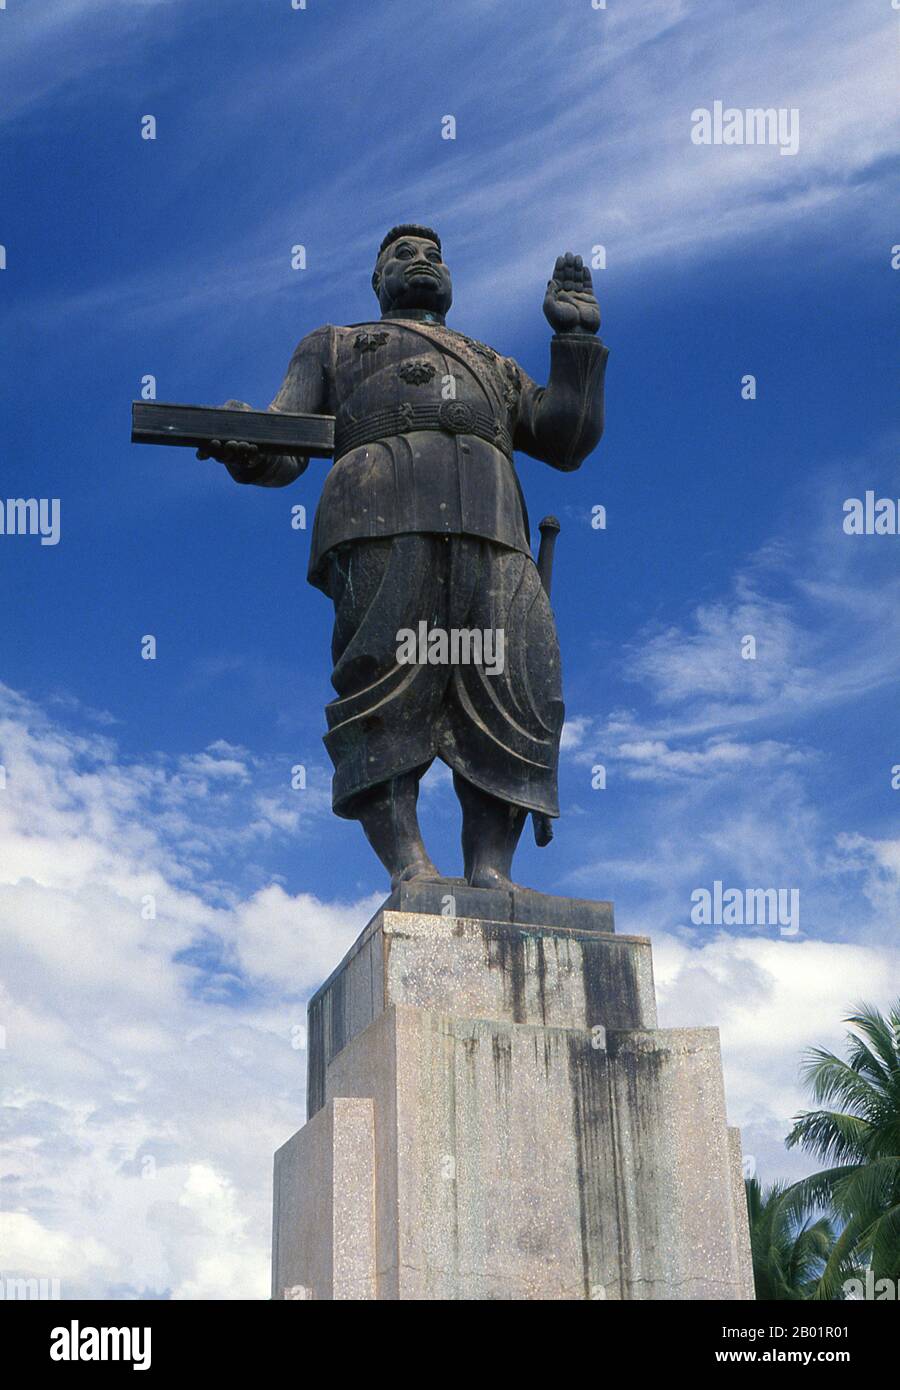 Laos: A Socialist realist-style statue of King Sisavang Vong (14 July 1885 - 29 October 1959) in Vientiane. The statue was a gift from the Soviet Union.  Sisavang Phoulivong (or Sisavangvong) was King of Luang Prabang and later the Kingdom of Laos from 28 April 1904 until his death on 20 October 1959.  His father was King Zakarine and his mother was Queen Thongsy. He was educated at Lycée Chasseloup-Laubat, Saigon, and at l'École Coloniale in Paris. He was known as a 'playboy' king with up to 50 children by as many as 15 wives. Stock Photo